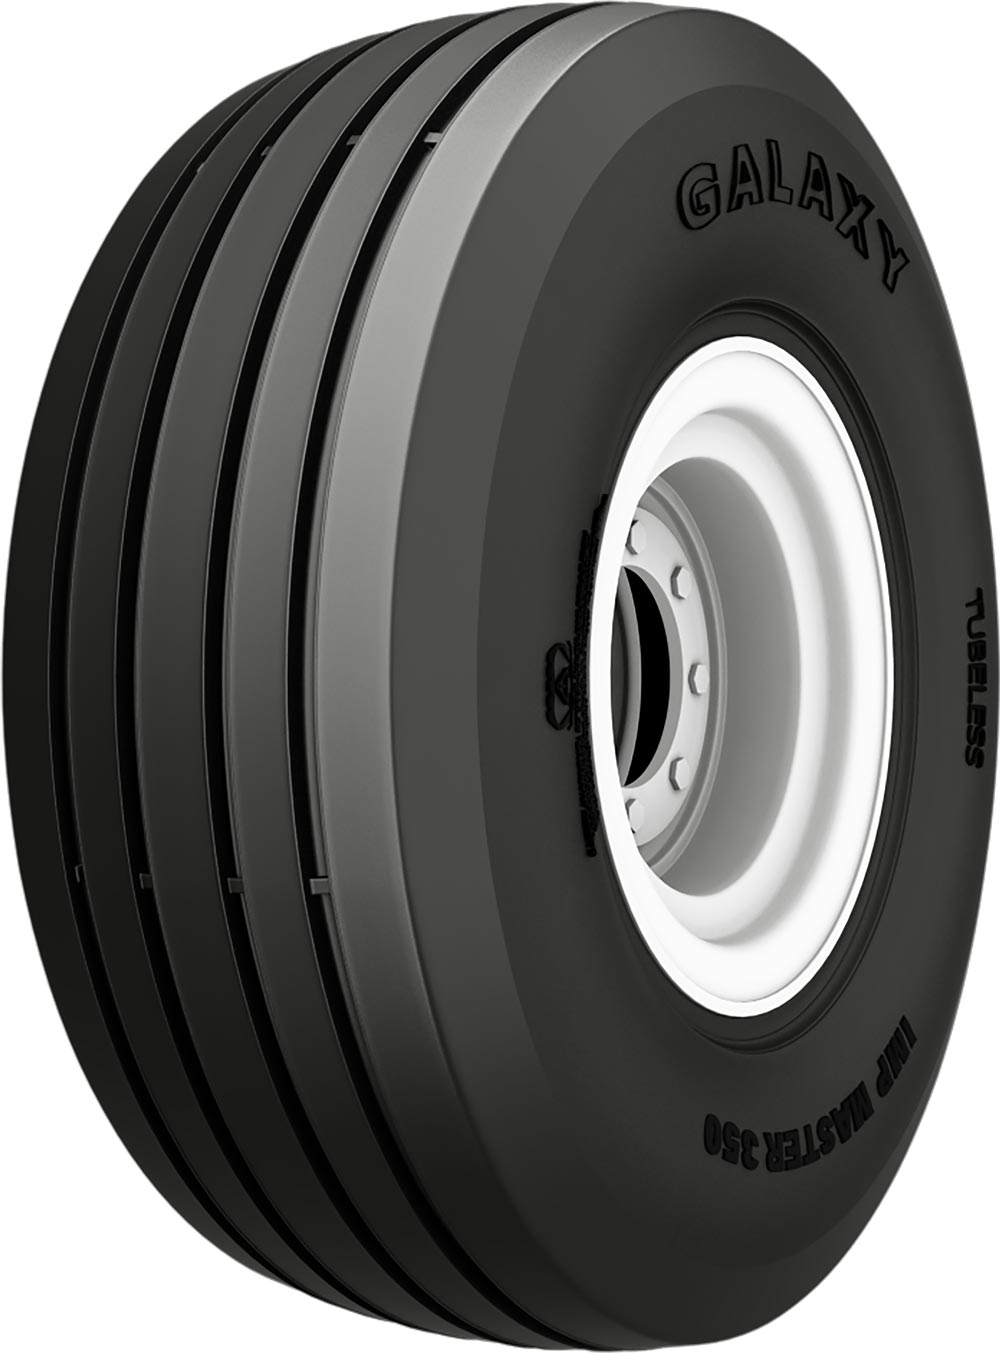 product_type-industrial_tires Galaxy Impmaster 350 12PR TL 11 R15 L